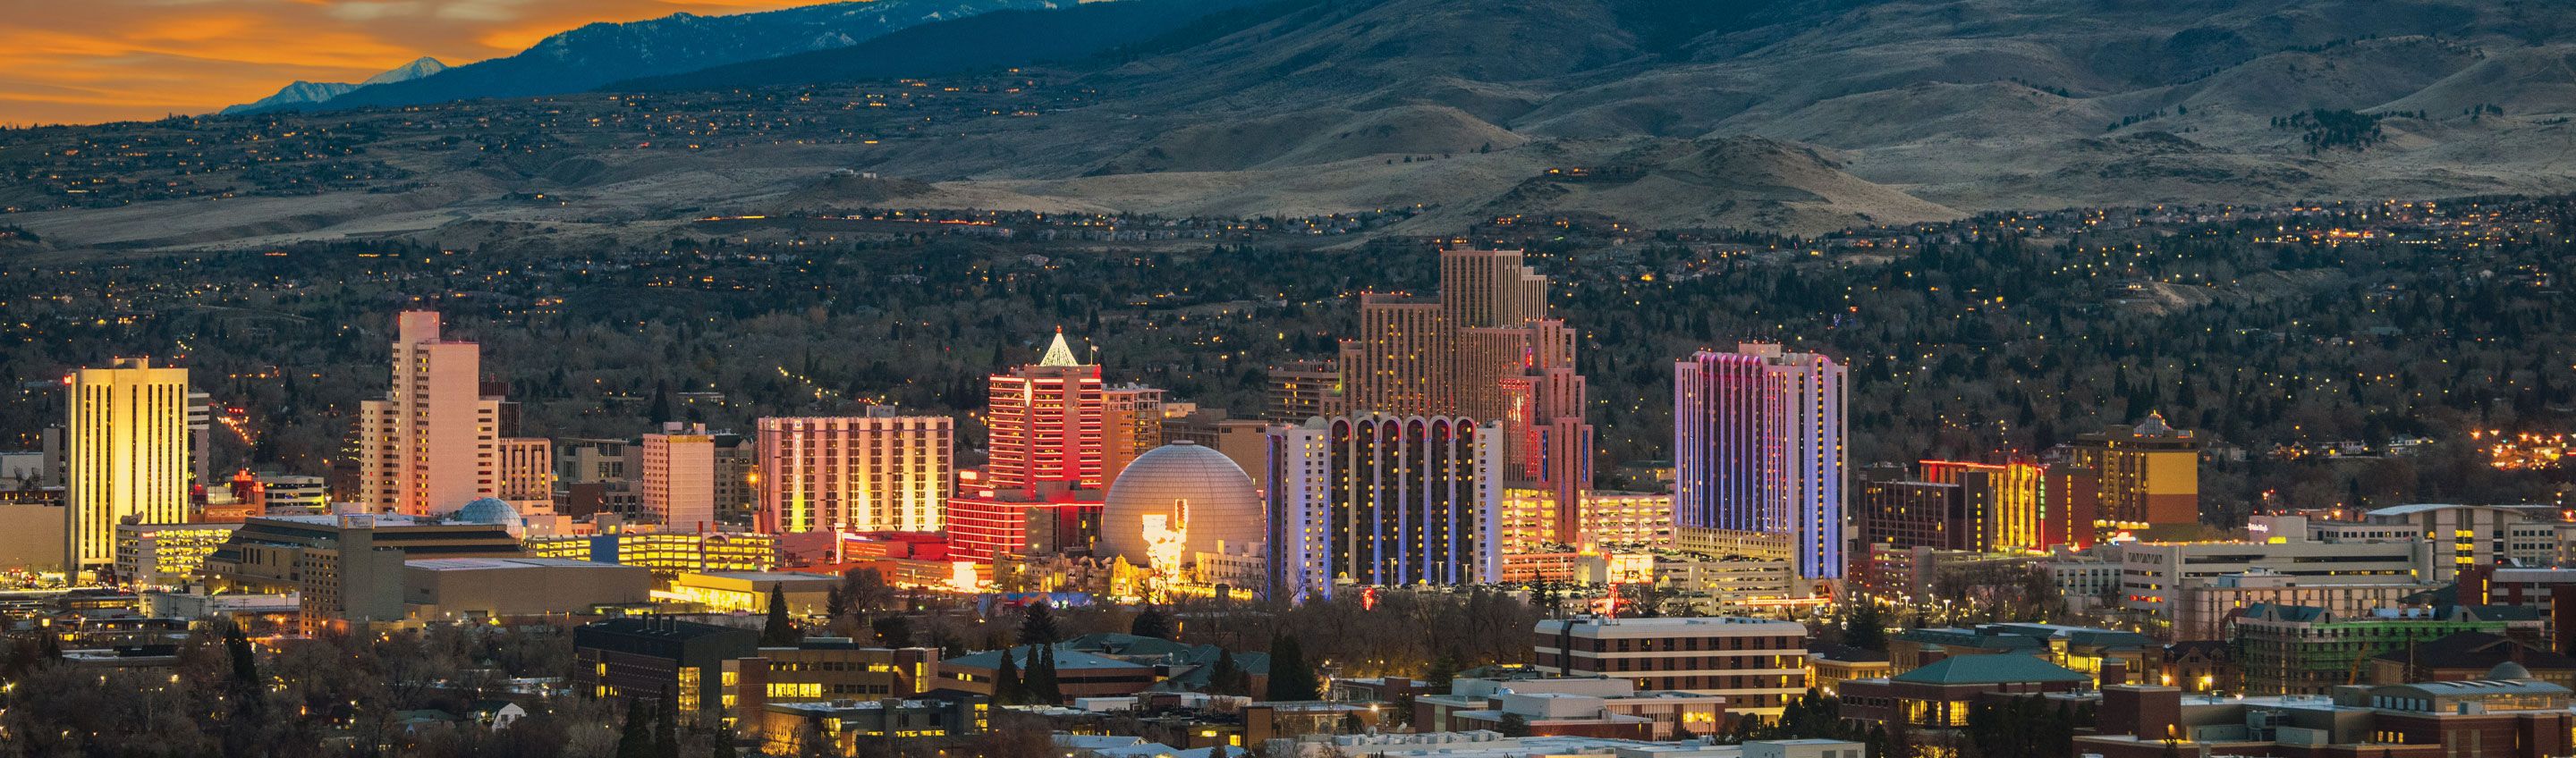 Sunset view of reno skyline with mountains beyond